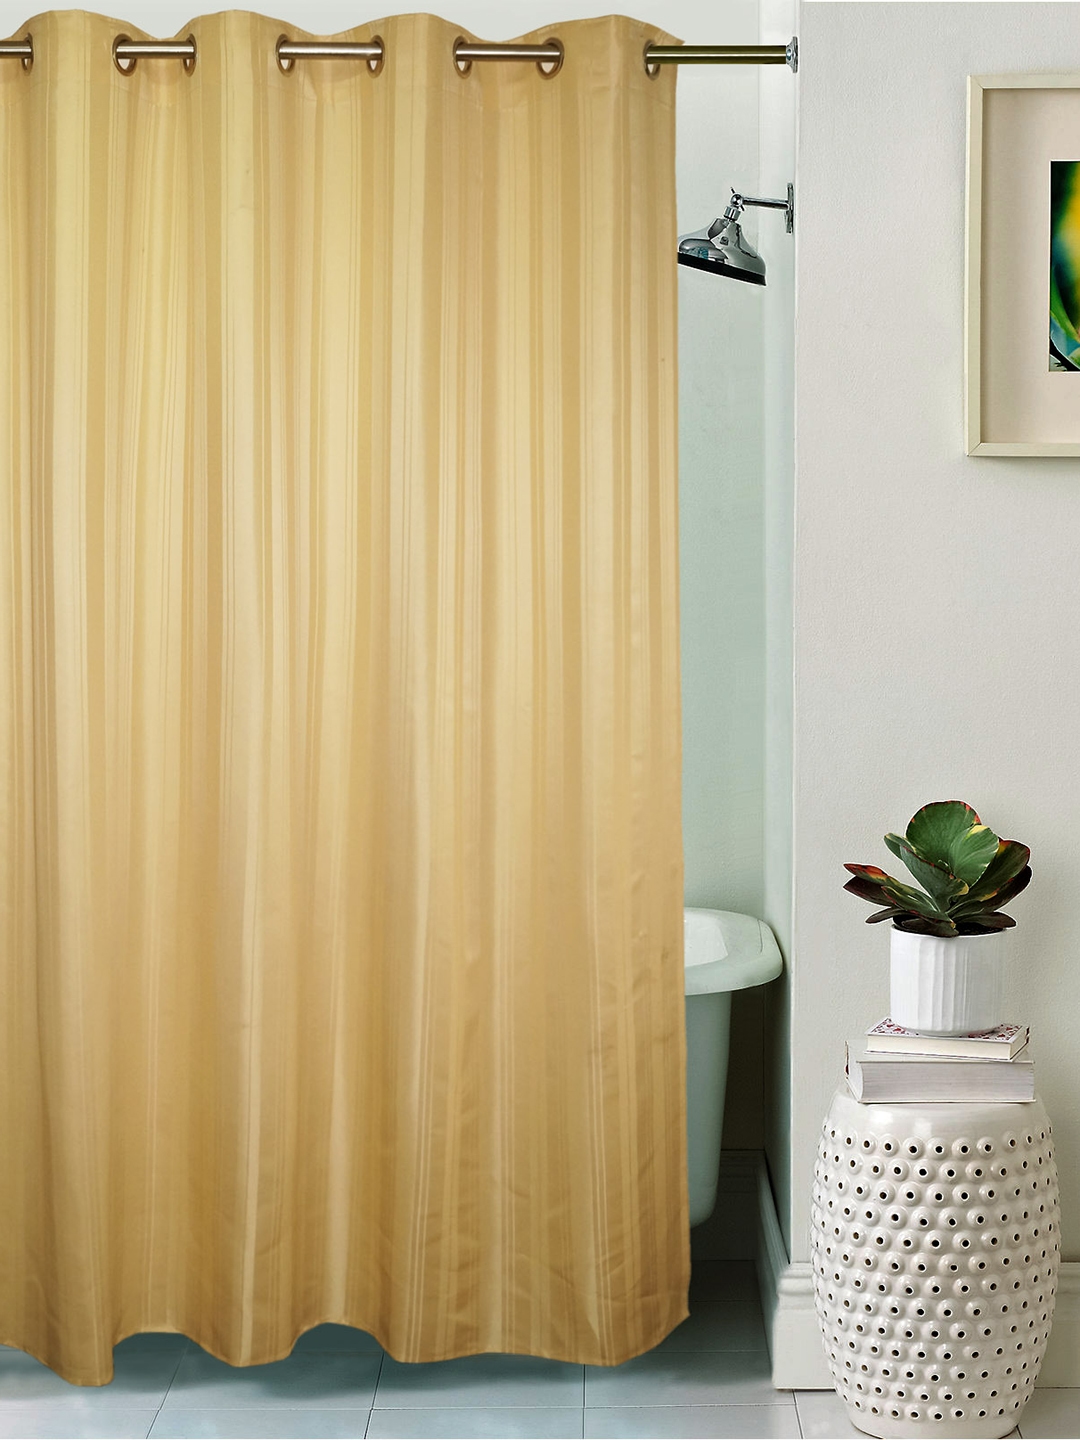 Lushomes Gold-Toned Striped Shower Curtain